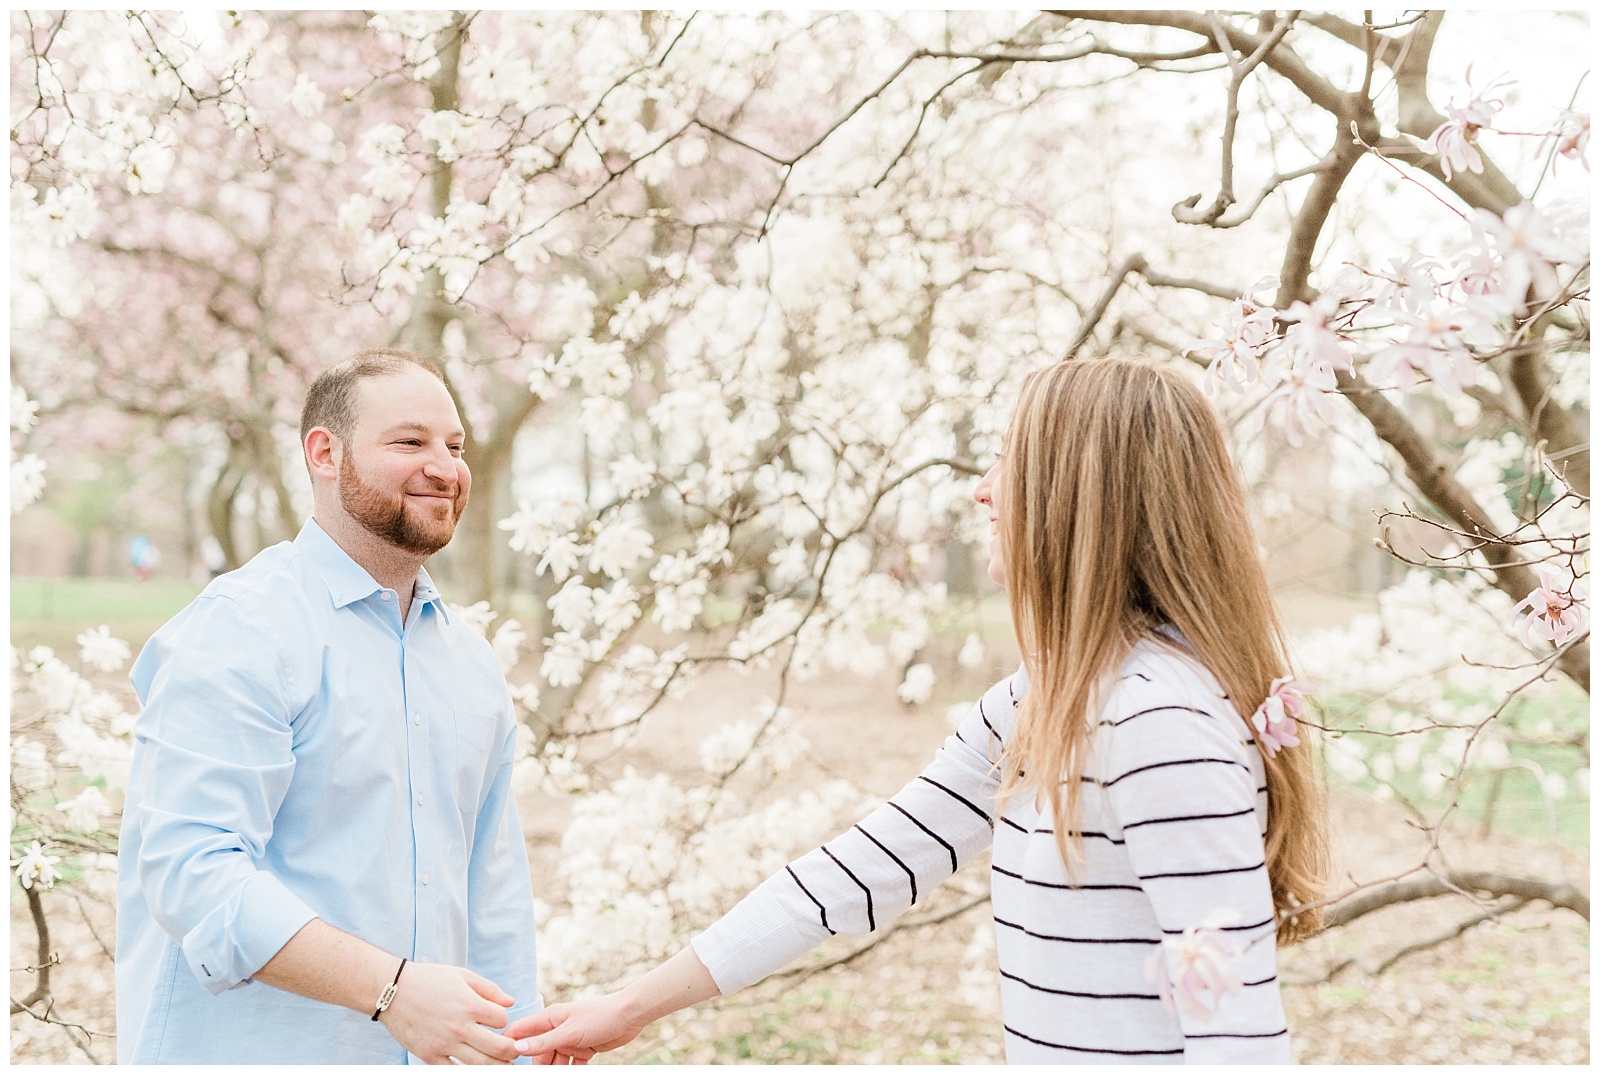 Central Park, NYC engagement session, springtime, wedding photographer, New York, dancing, cherry blossoms